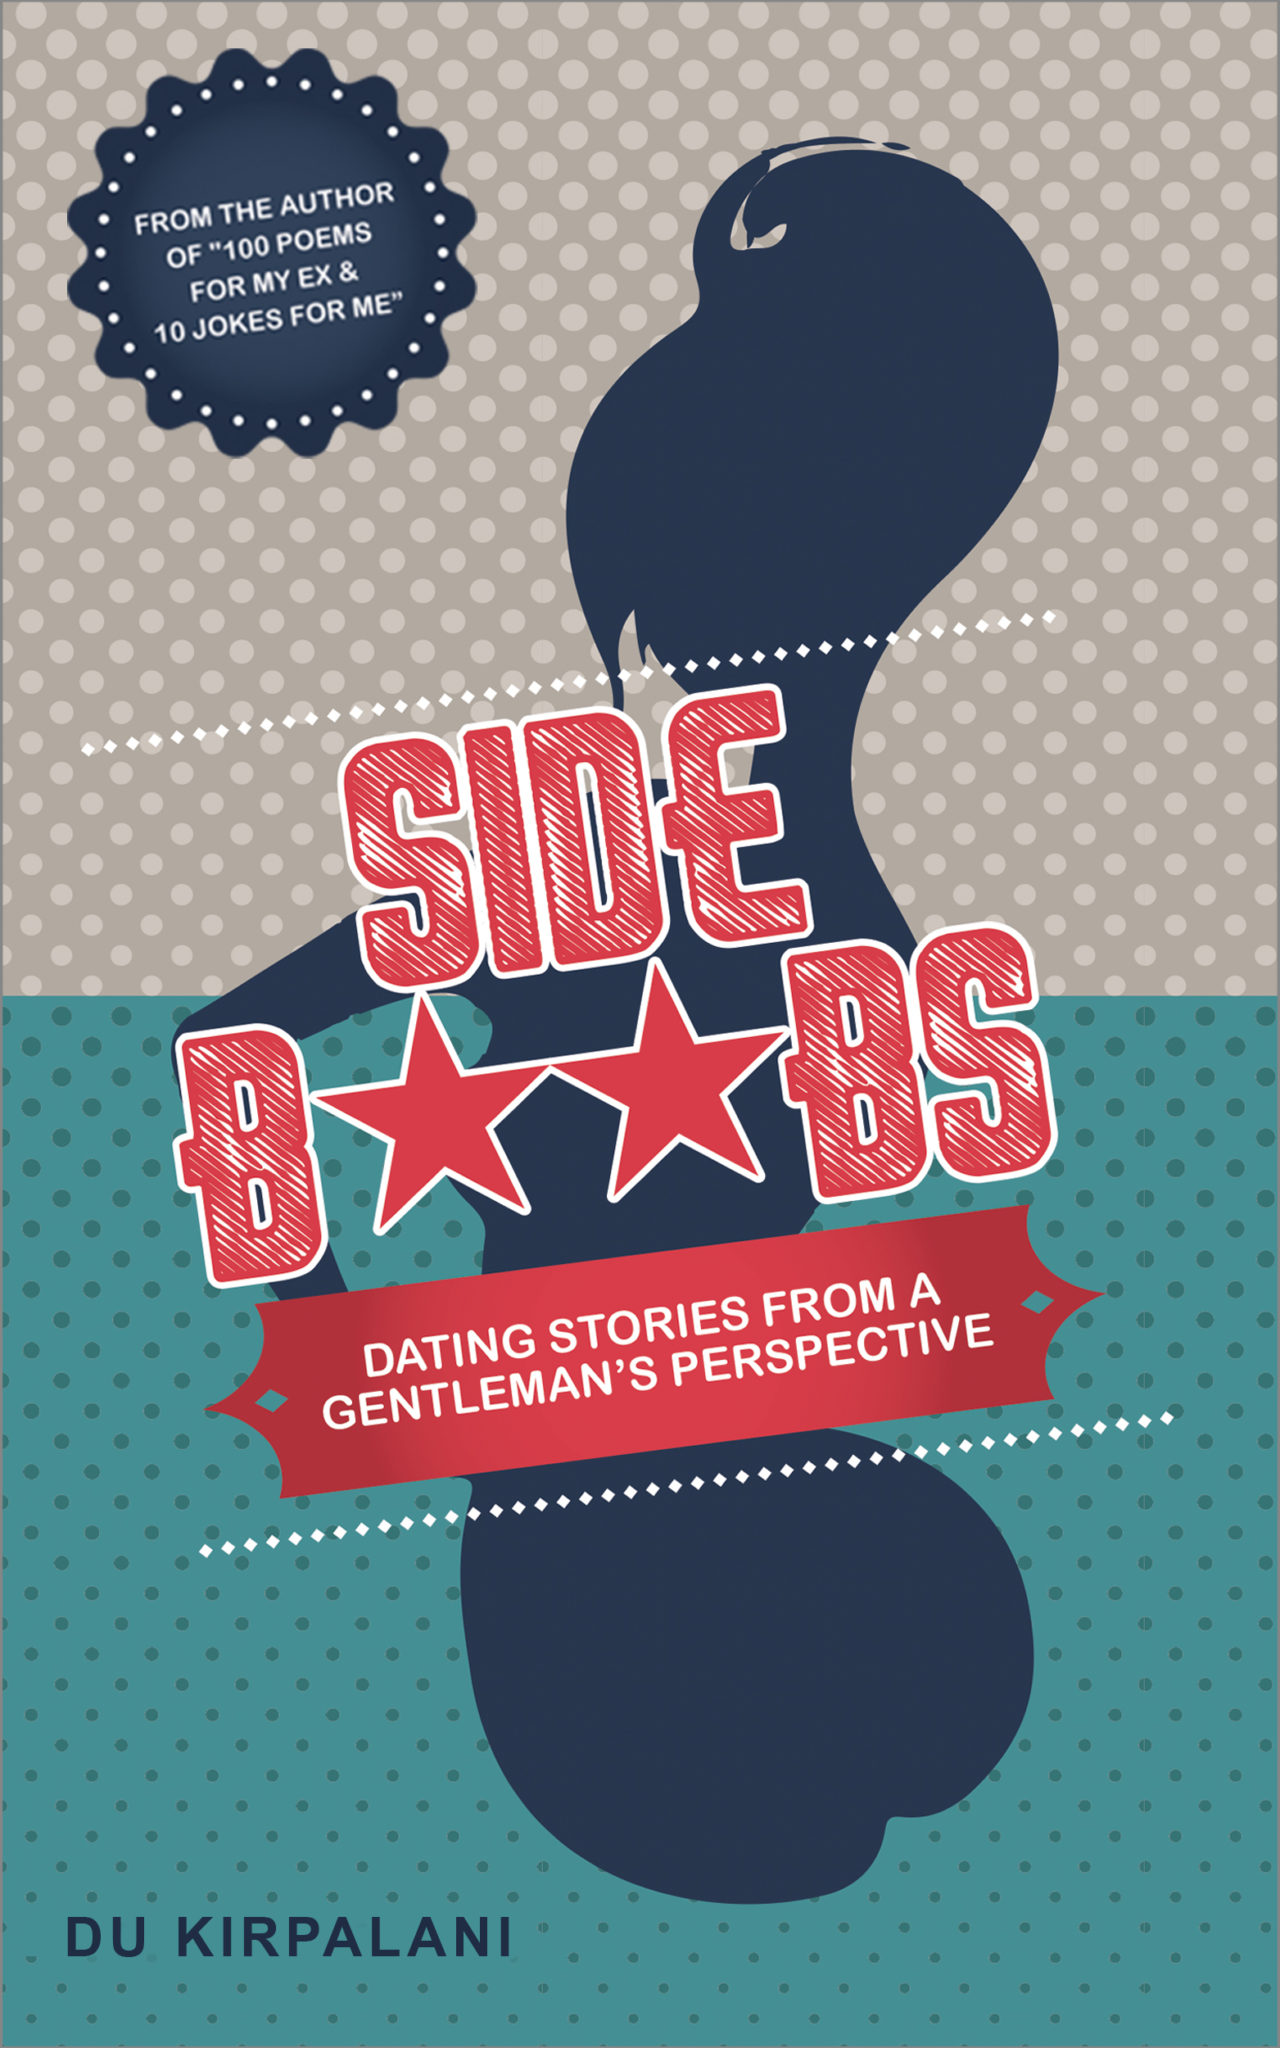 FREE: Side Boobs: Dating Stories from a Gentleman’s Perspective by Du Kirpalani